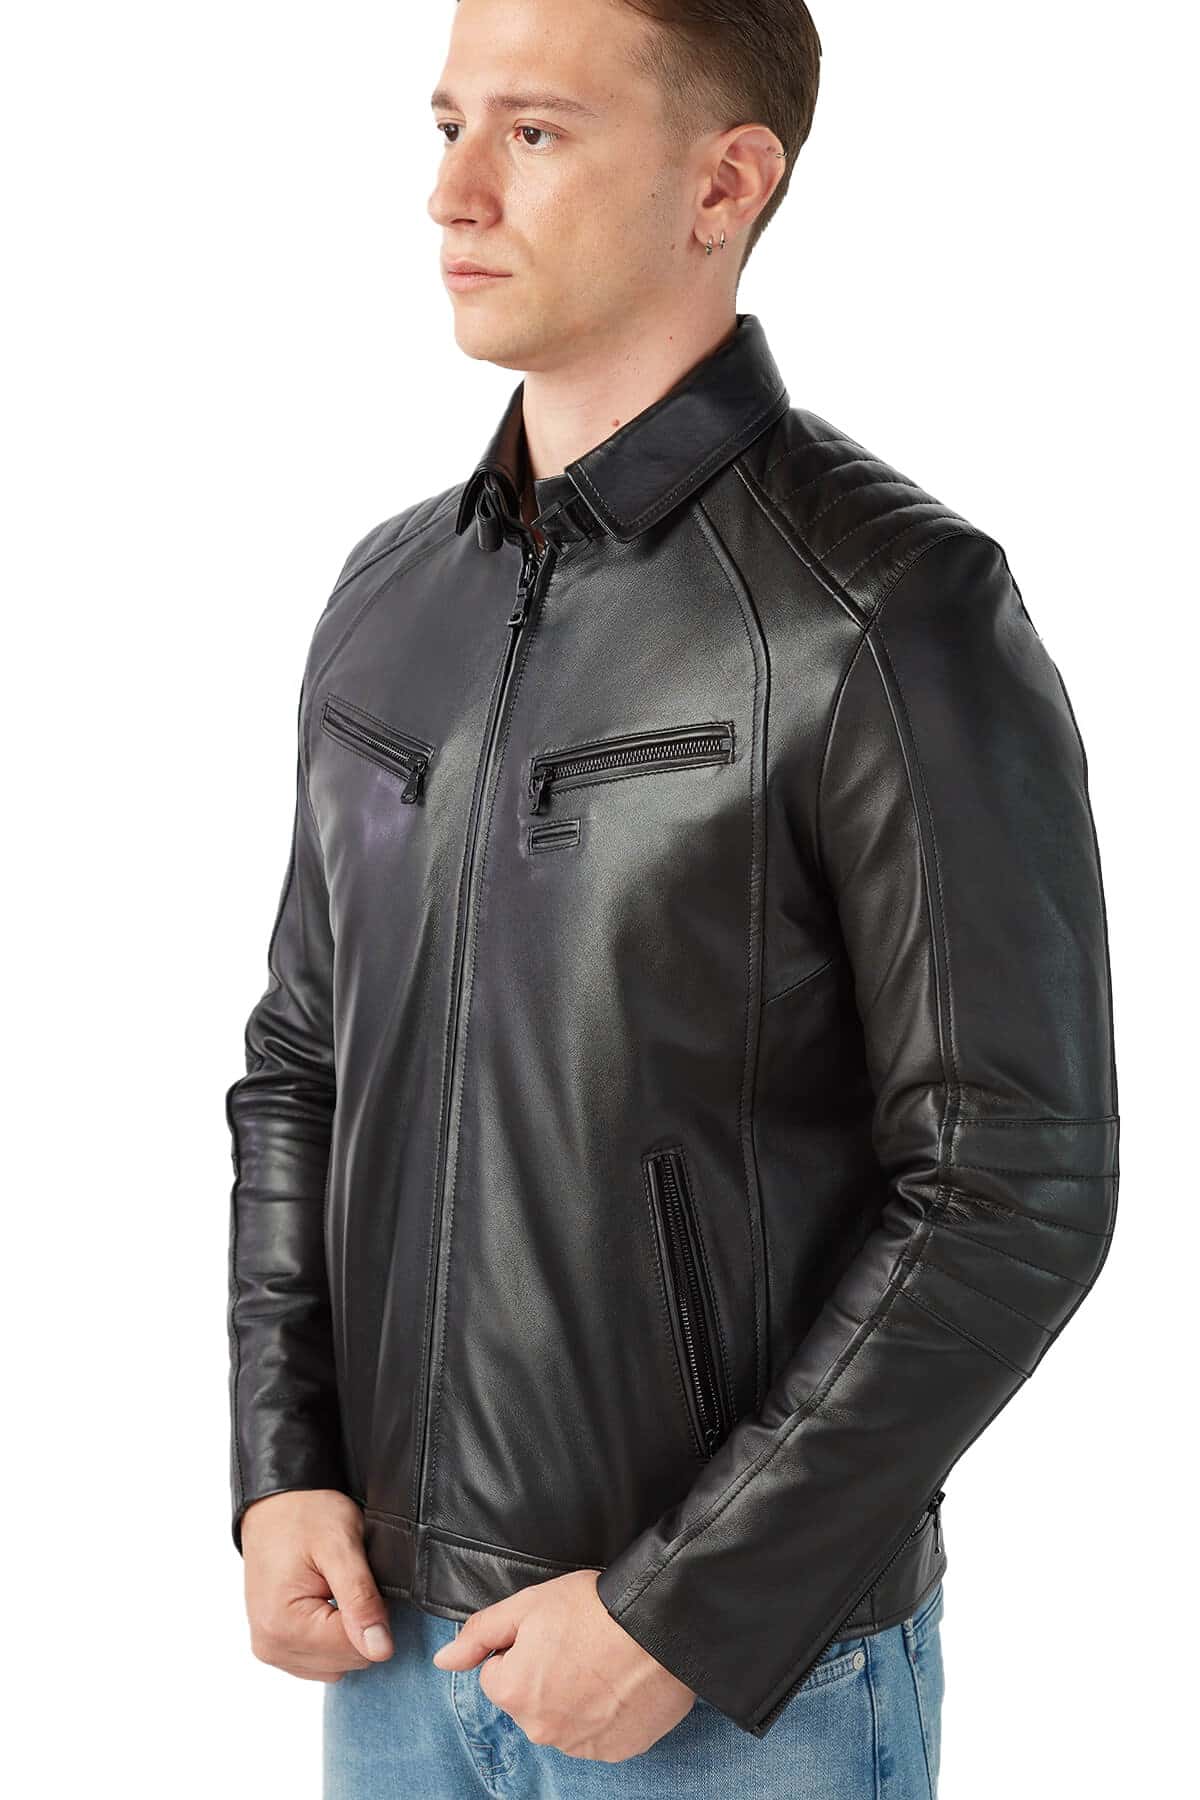 Carlo Men's 100 % Real Black Leather Jacket